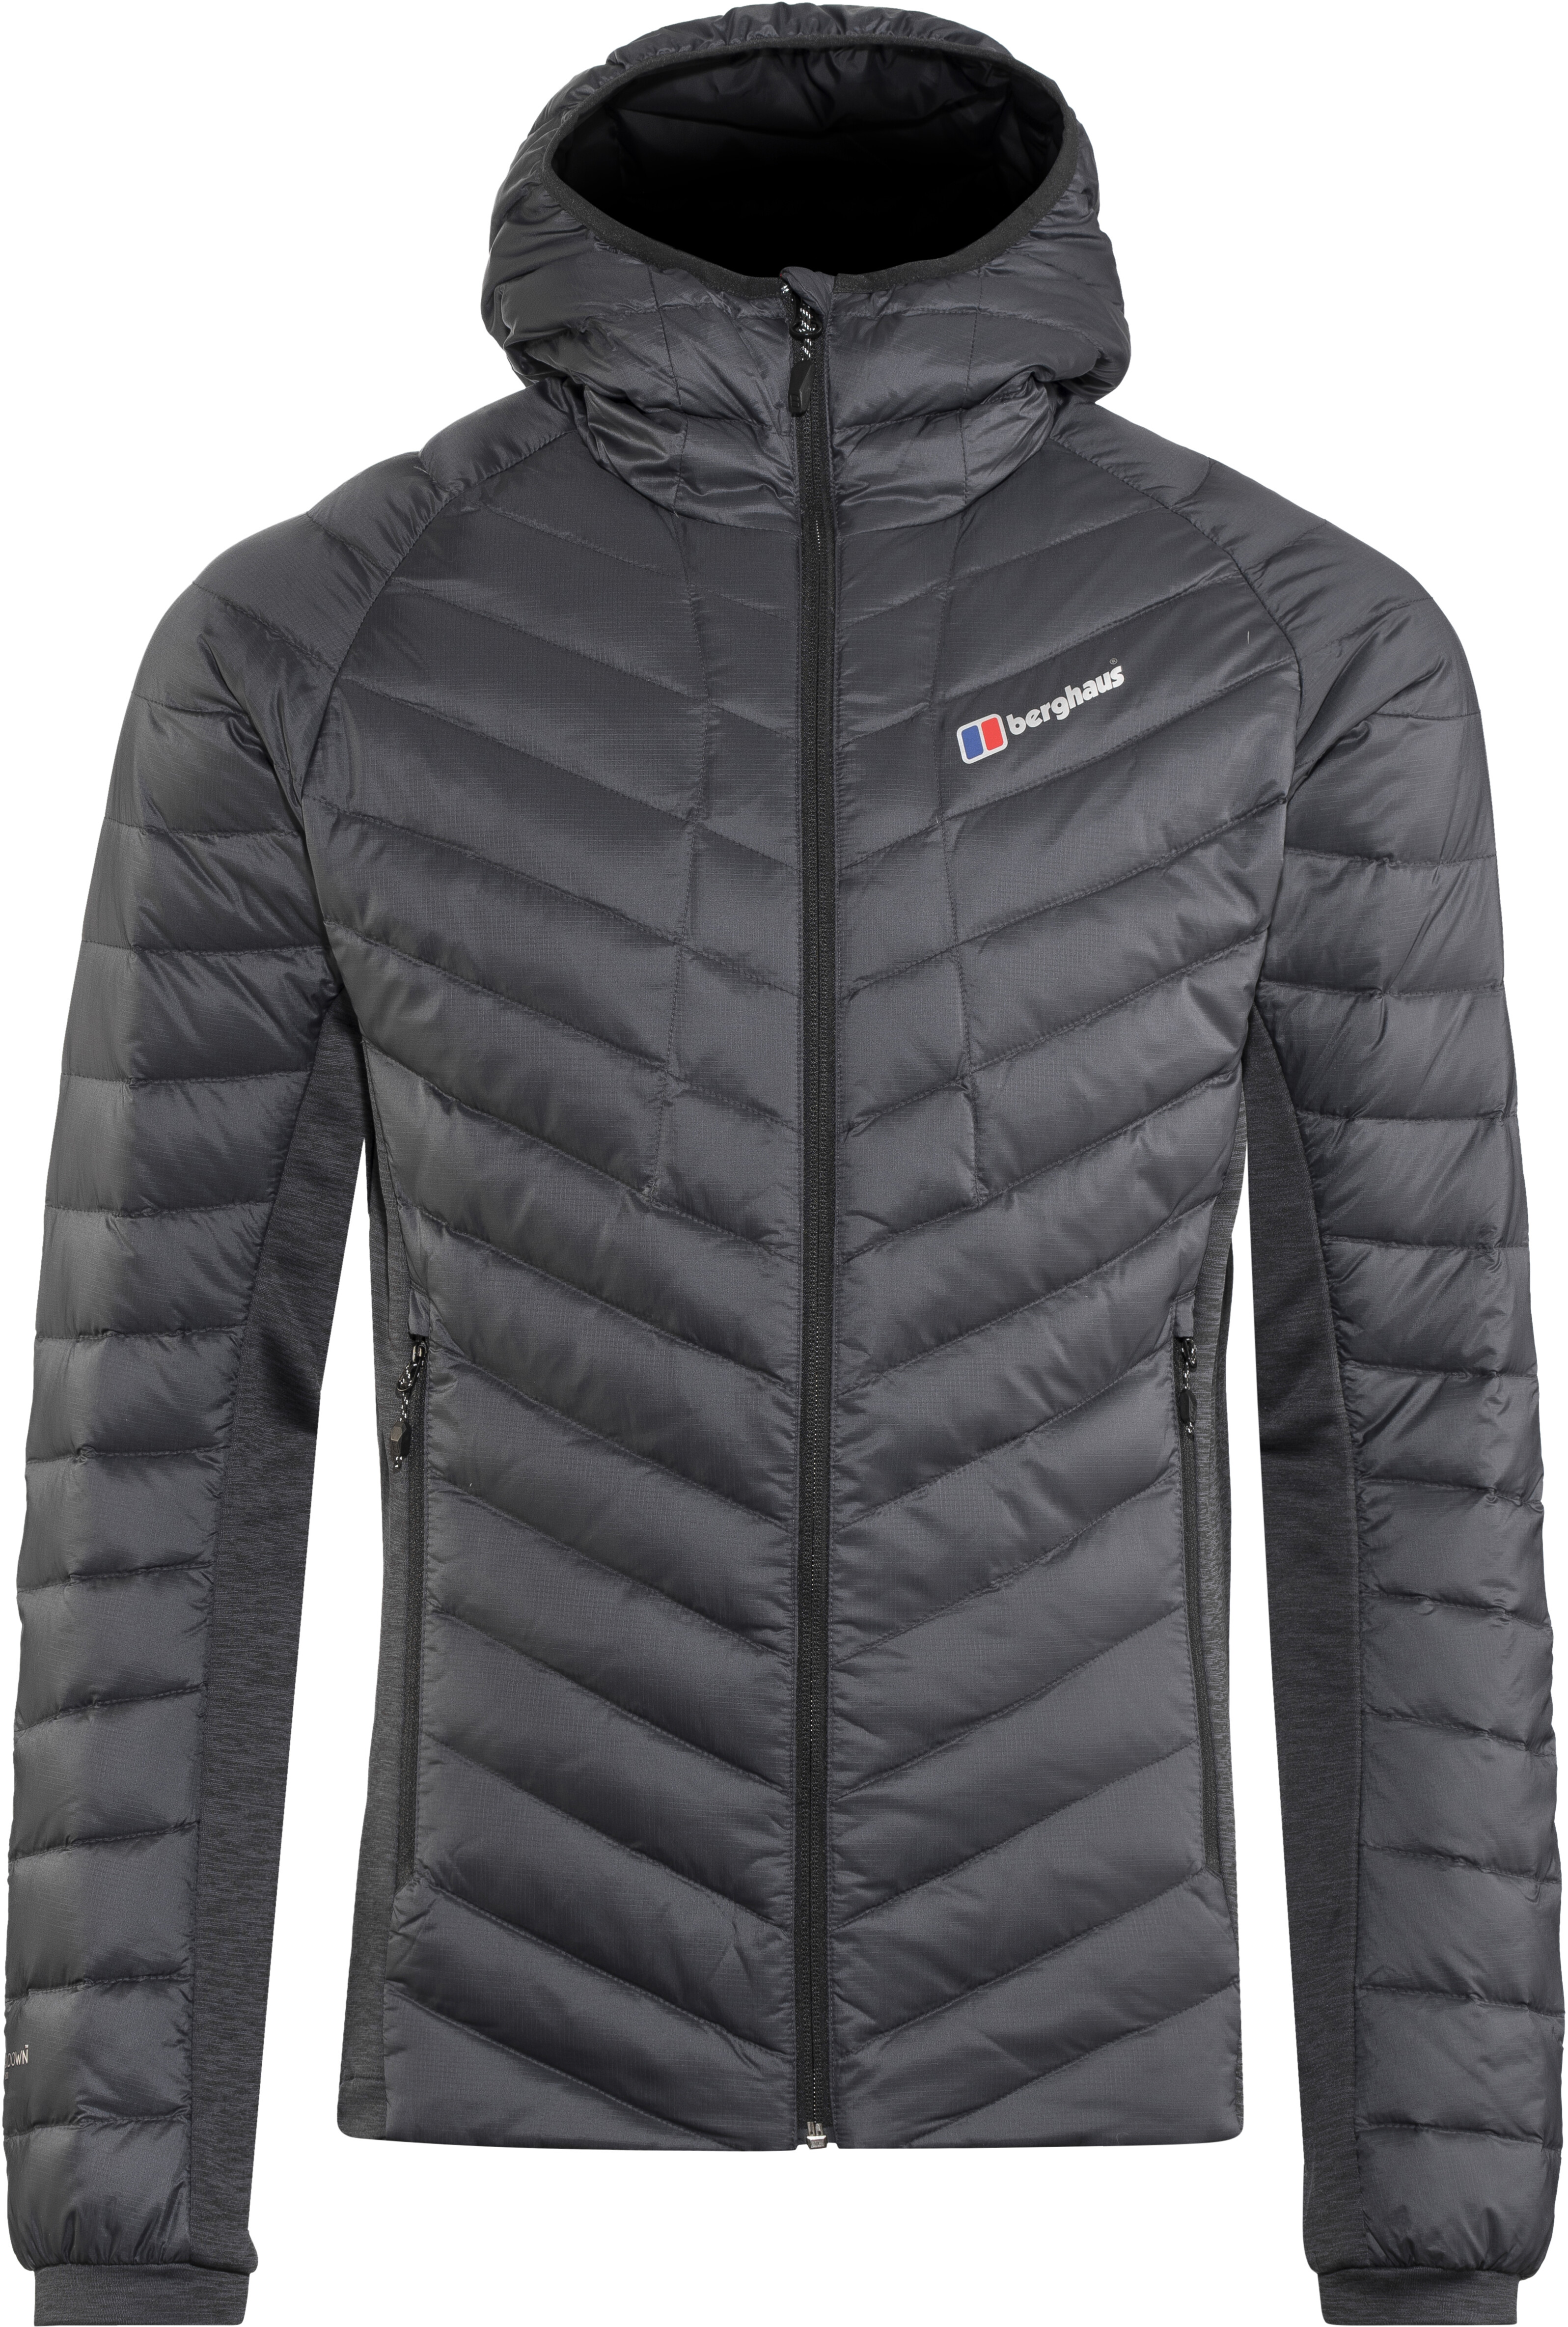 Berghaus Tephra Stretch Reflect Down Jacket Men carbon at addnature.co.uk